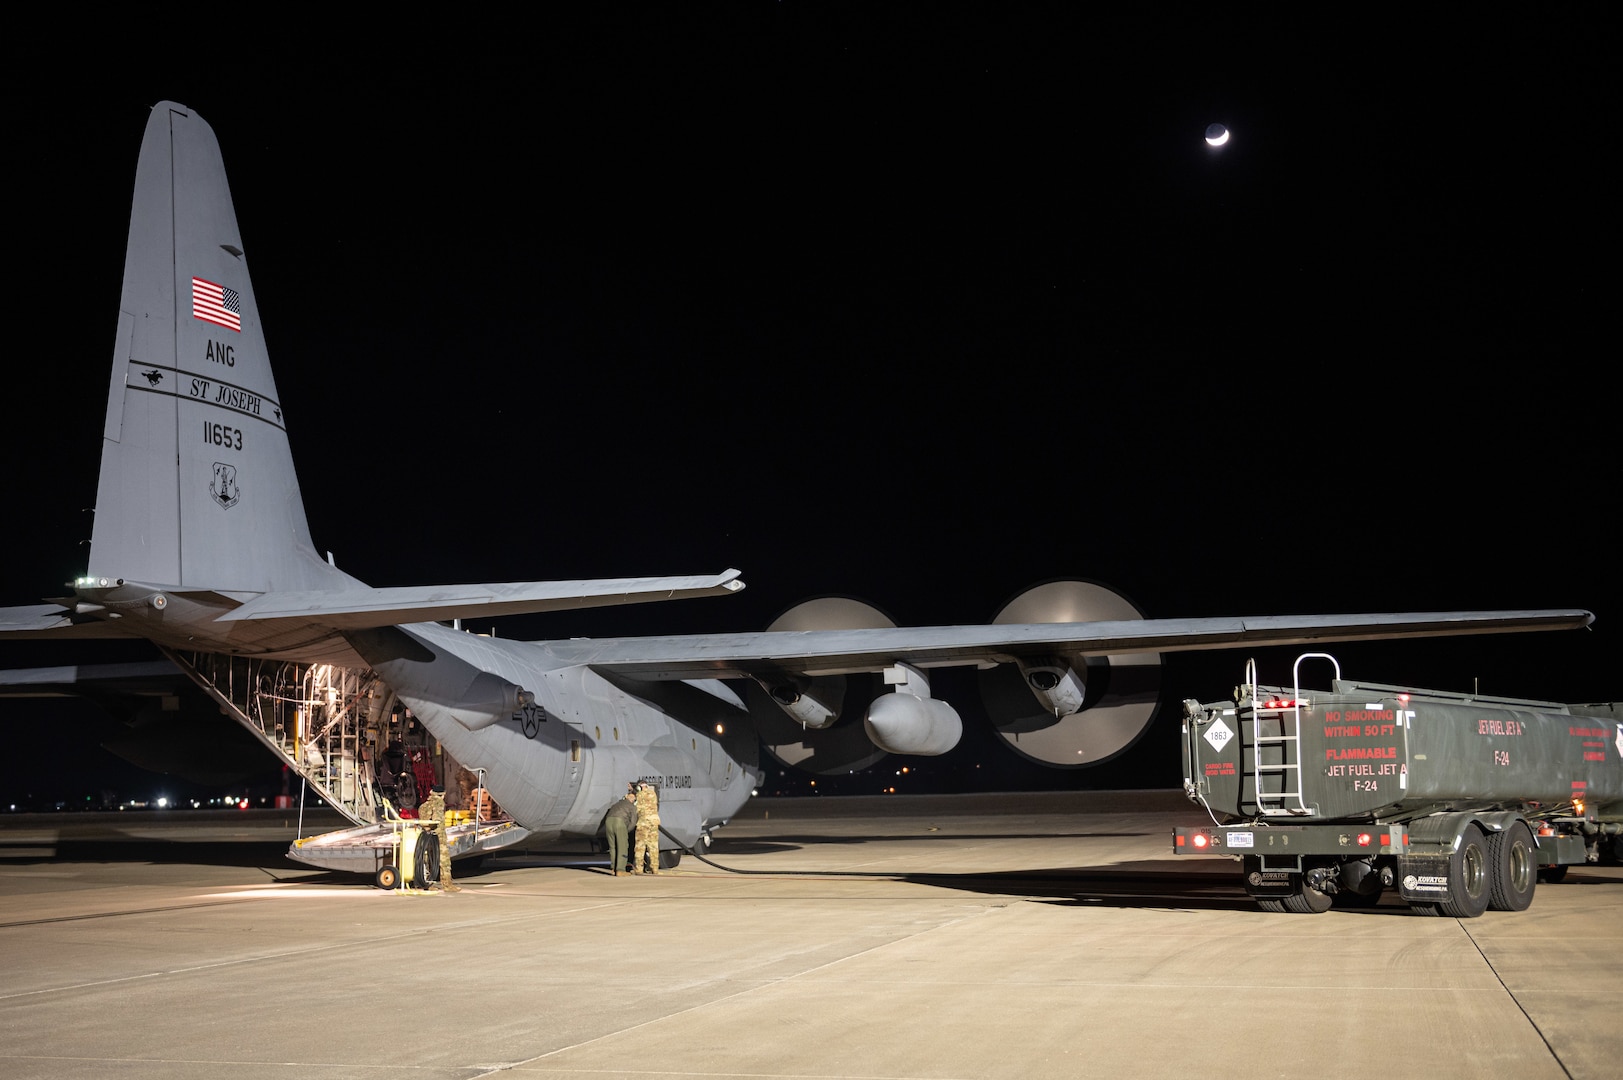 Airmen assigned to the 139th Airlift Wing, Missouri Air National Guard, refuel a C-130H Hercules aircraft Feb. 13, 2024, at Rosecrans Air National Guard Base, St. Joseph, Missouri. Aircrews conducted a 41-hour sortie in which the aircraft engines ran continuously for 45 hours and the aircraft was refueled three times.